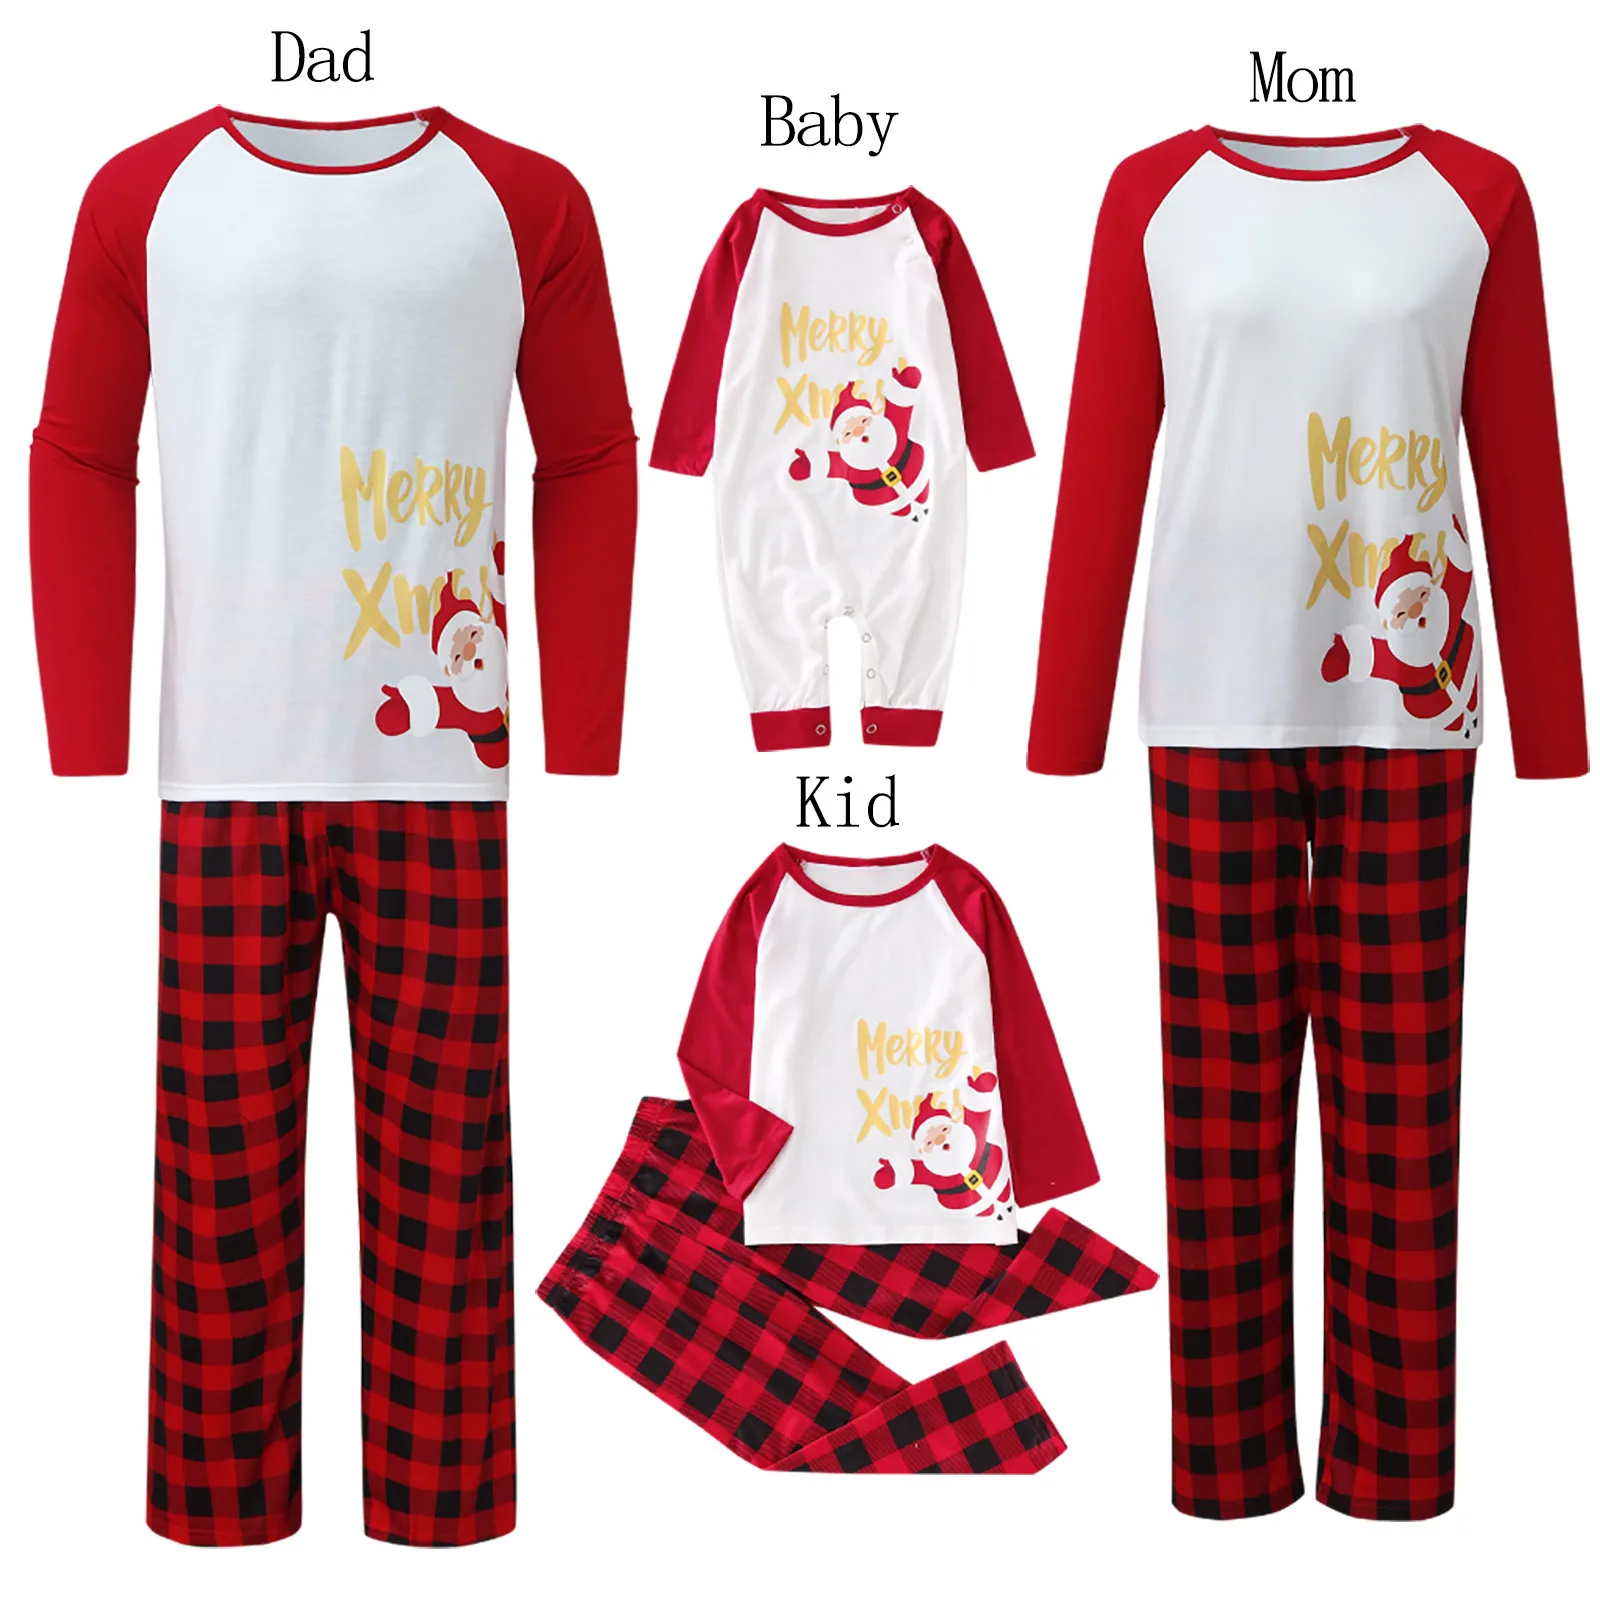 Pajamas Matching Pajamas Sets Deer Father Mother Kids & Dog Sleepwear Mommy and Me Xmas Pj's Clothes Baby Romper